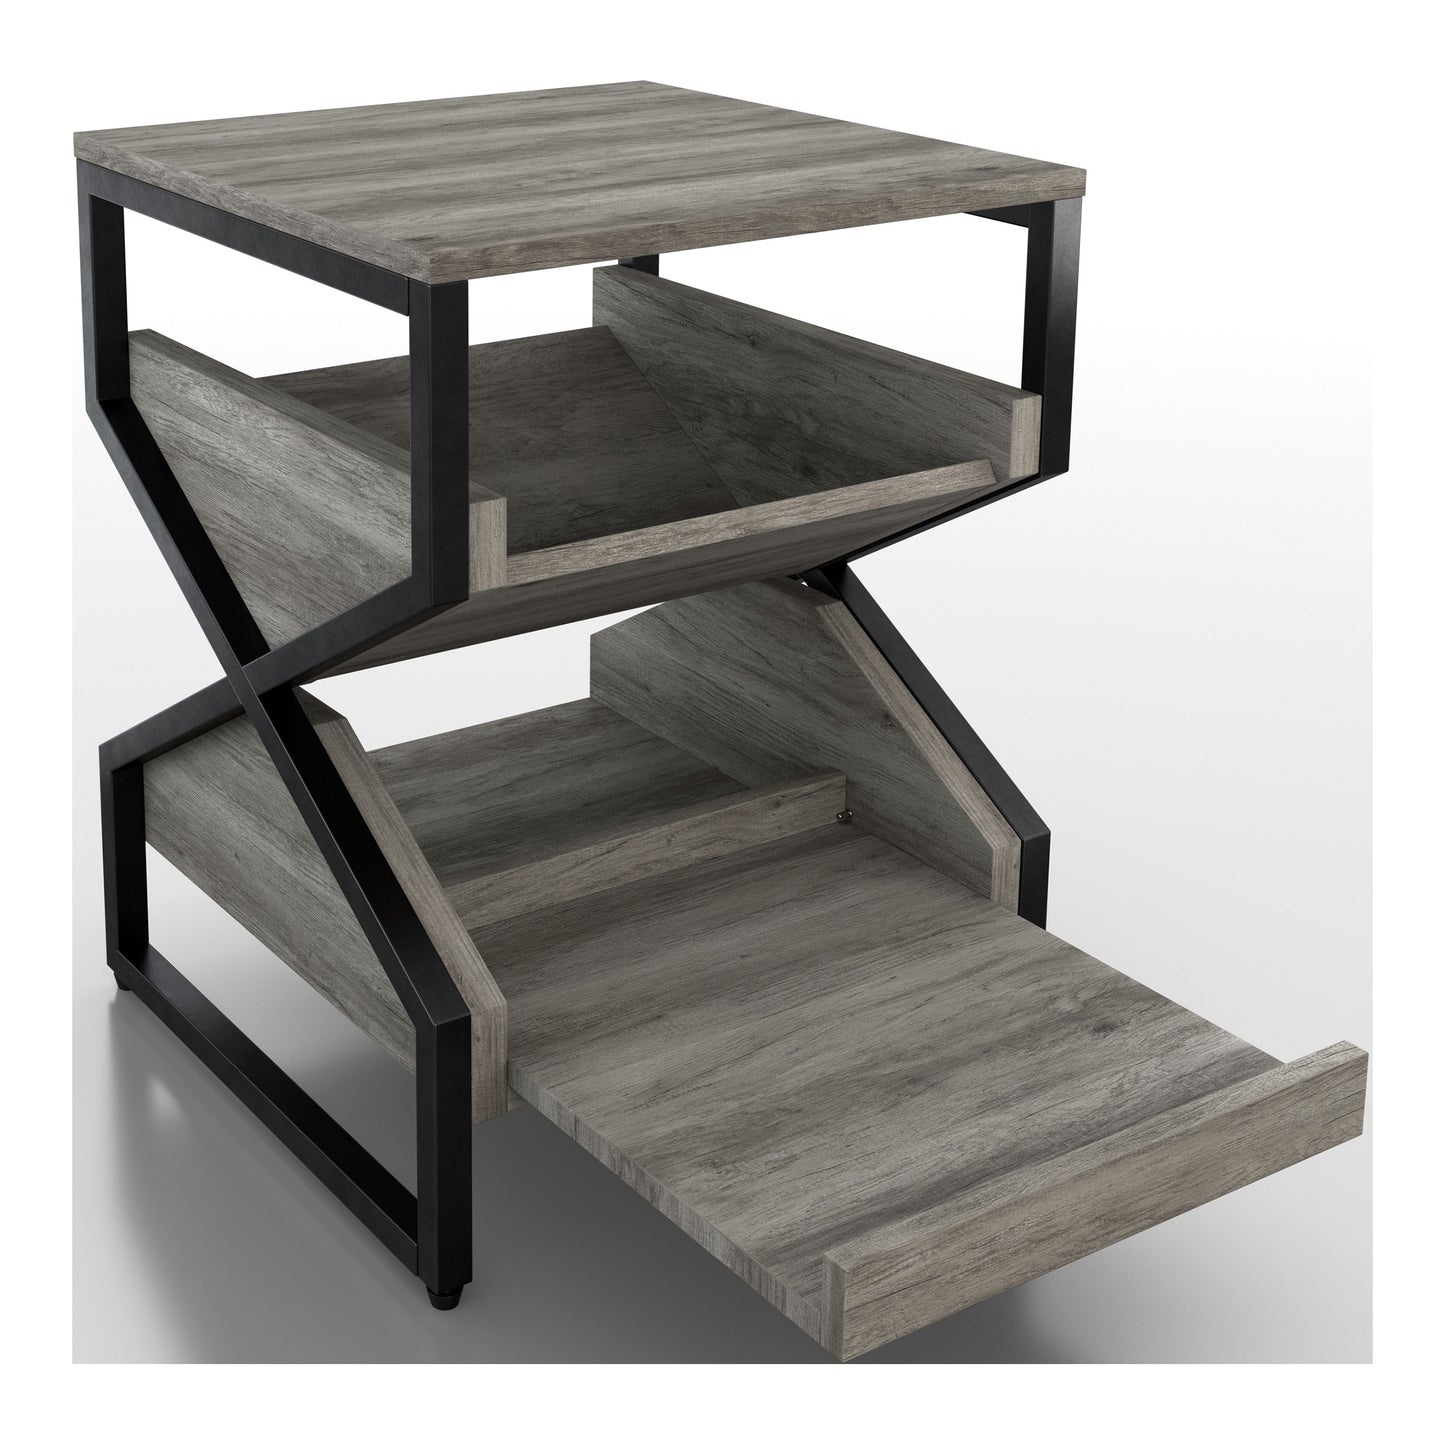 Right angled industrial vintage gray oak end table with a pull-out tray shelf extended on a white background